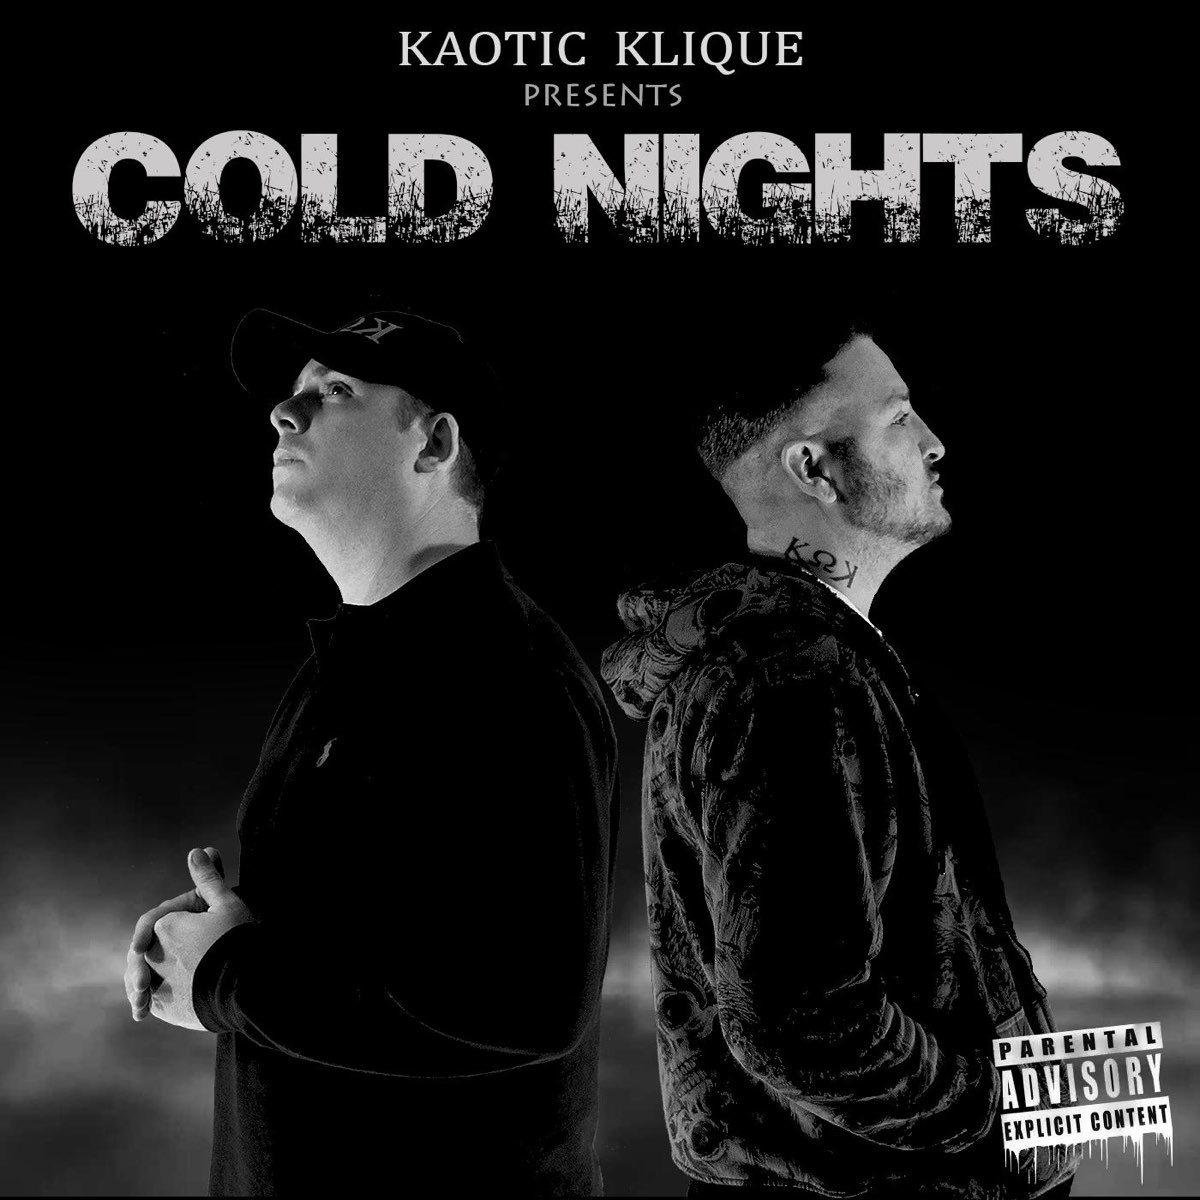 Kaotic Klique. Kaotic. Kaotic Klique face. On this Cold Cold Night. Cold nights 2